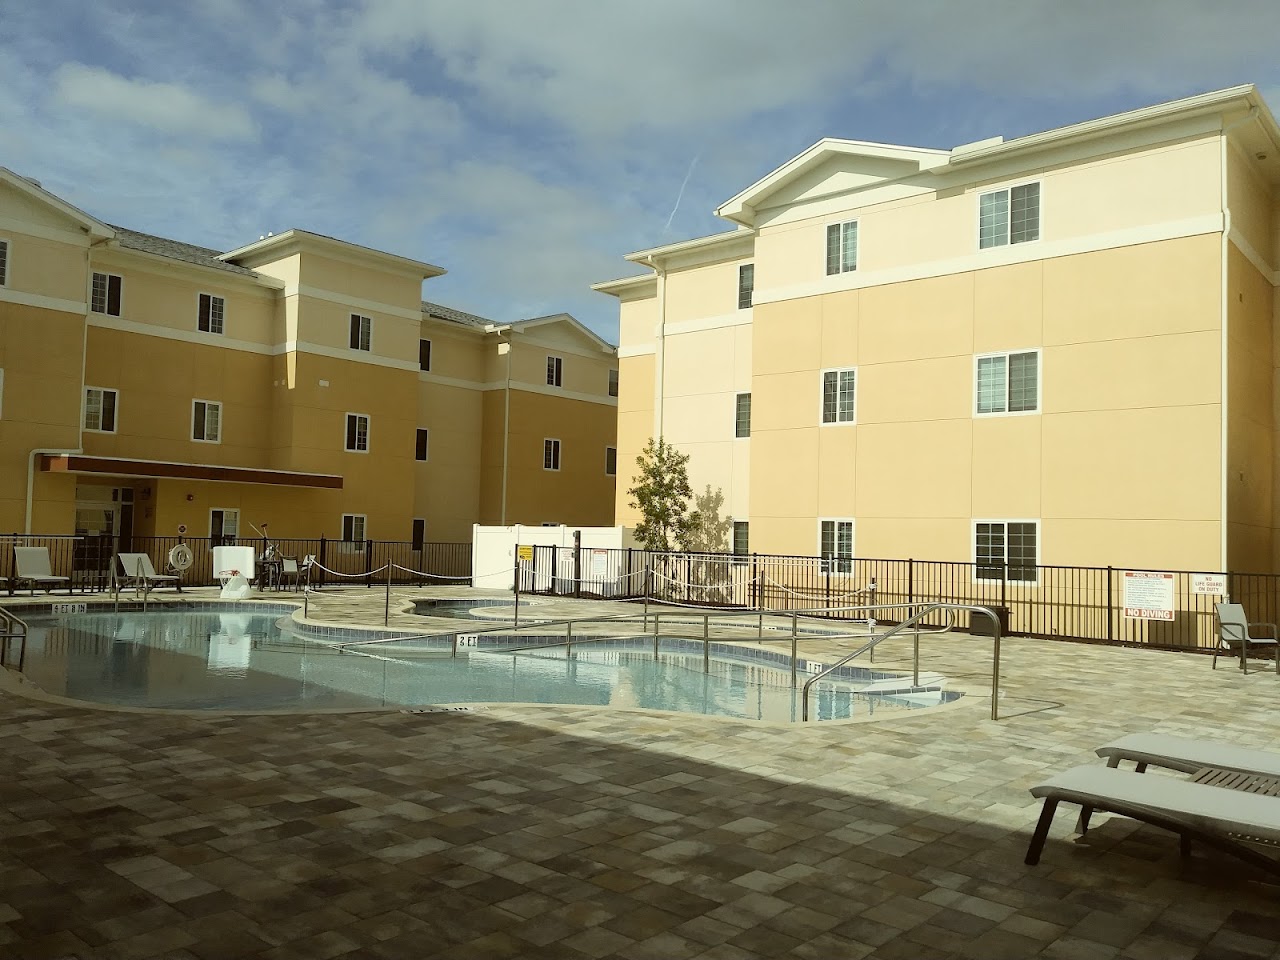 Photo of PROMISE IN BREVARD. Affordable housing located at 4105 NORFOLK PARKWAY WEST MELBOURNE, FL 32904